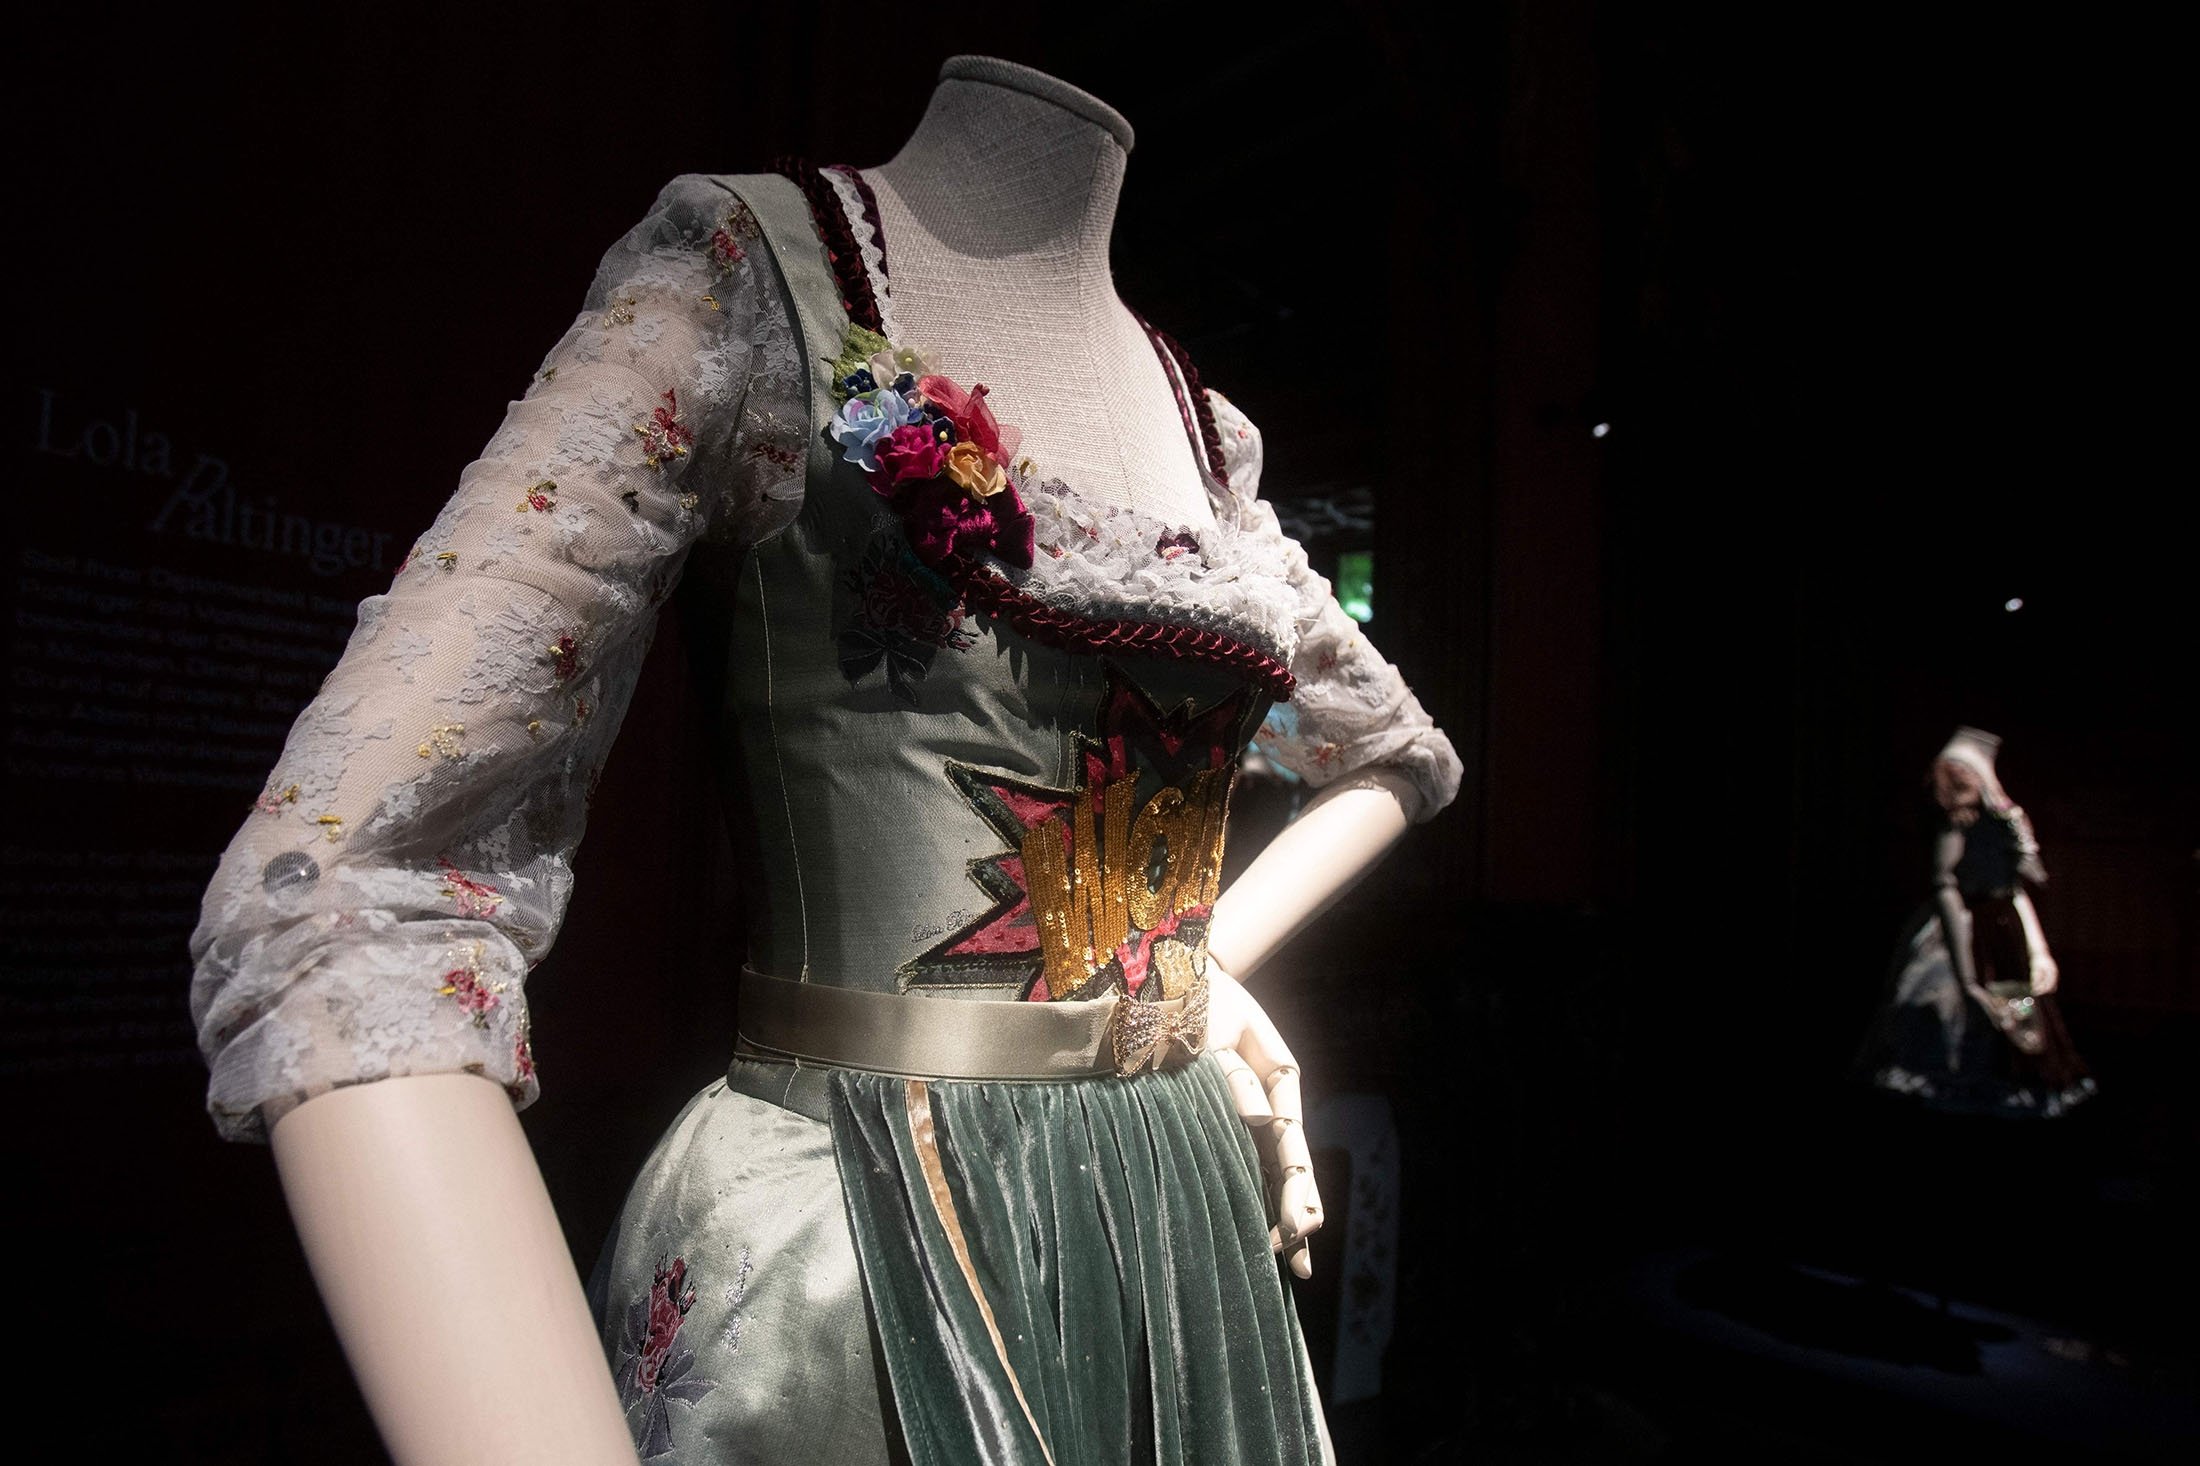 Dirndl dresses are on display at the exhibition 